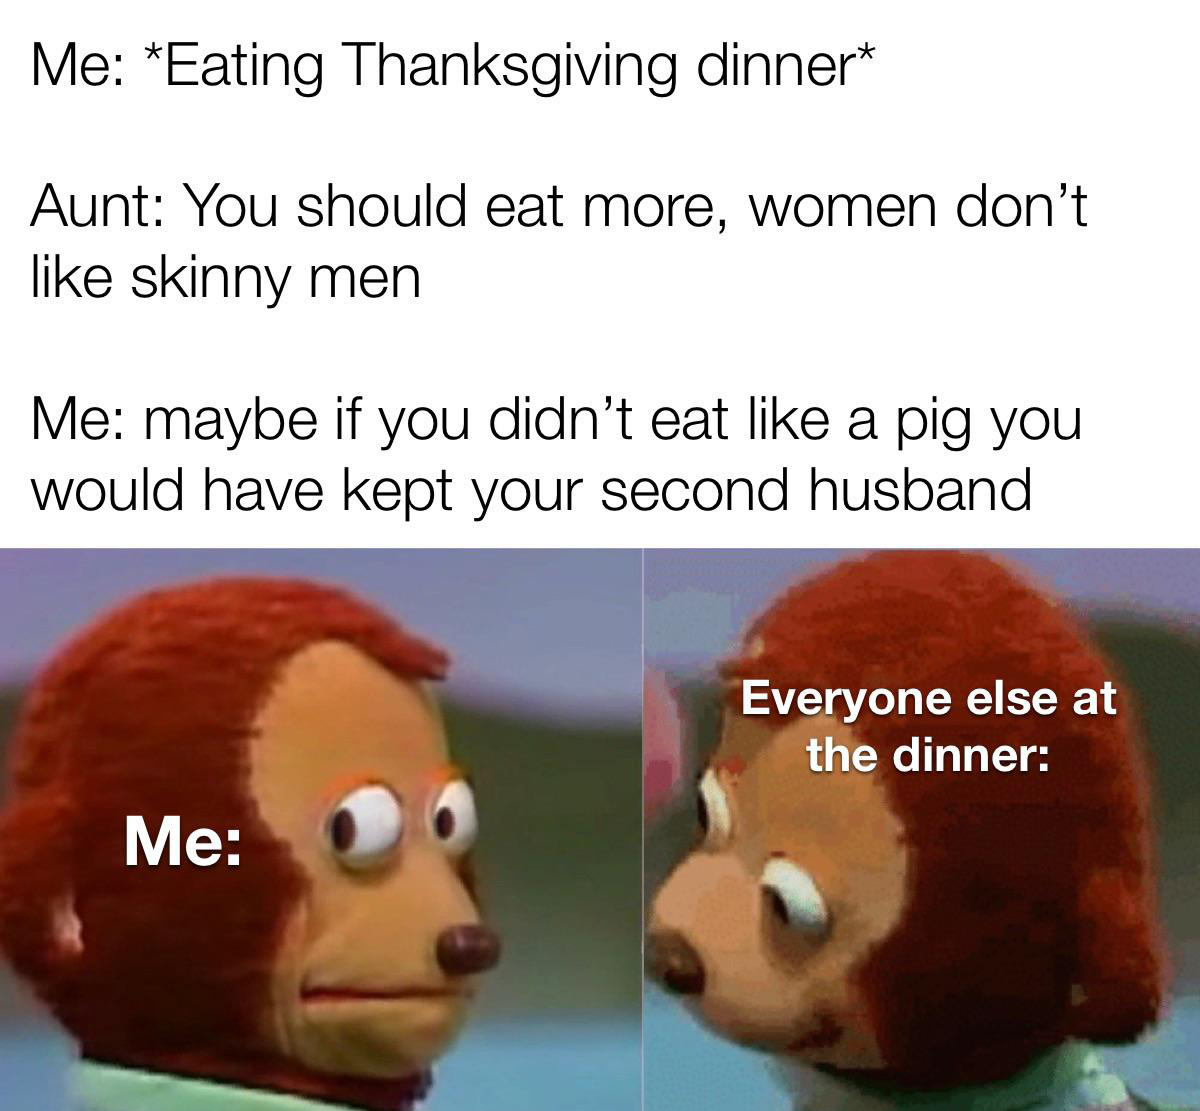 monday morning randomness - fauna - Me Eating Thanksgiving dinner Aunt You should eat more, women don't skinny men Me maybe if you didn't eat a pig you would have kept your second husband Me Everyone else at the dinner